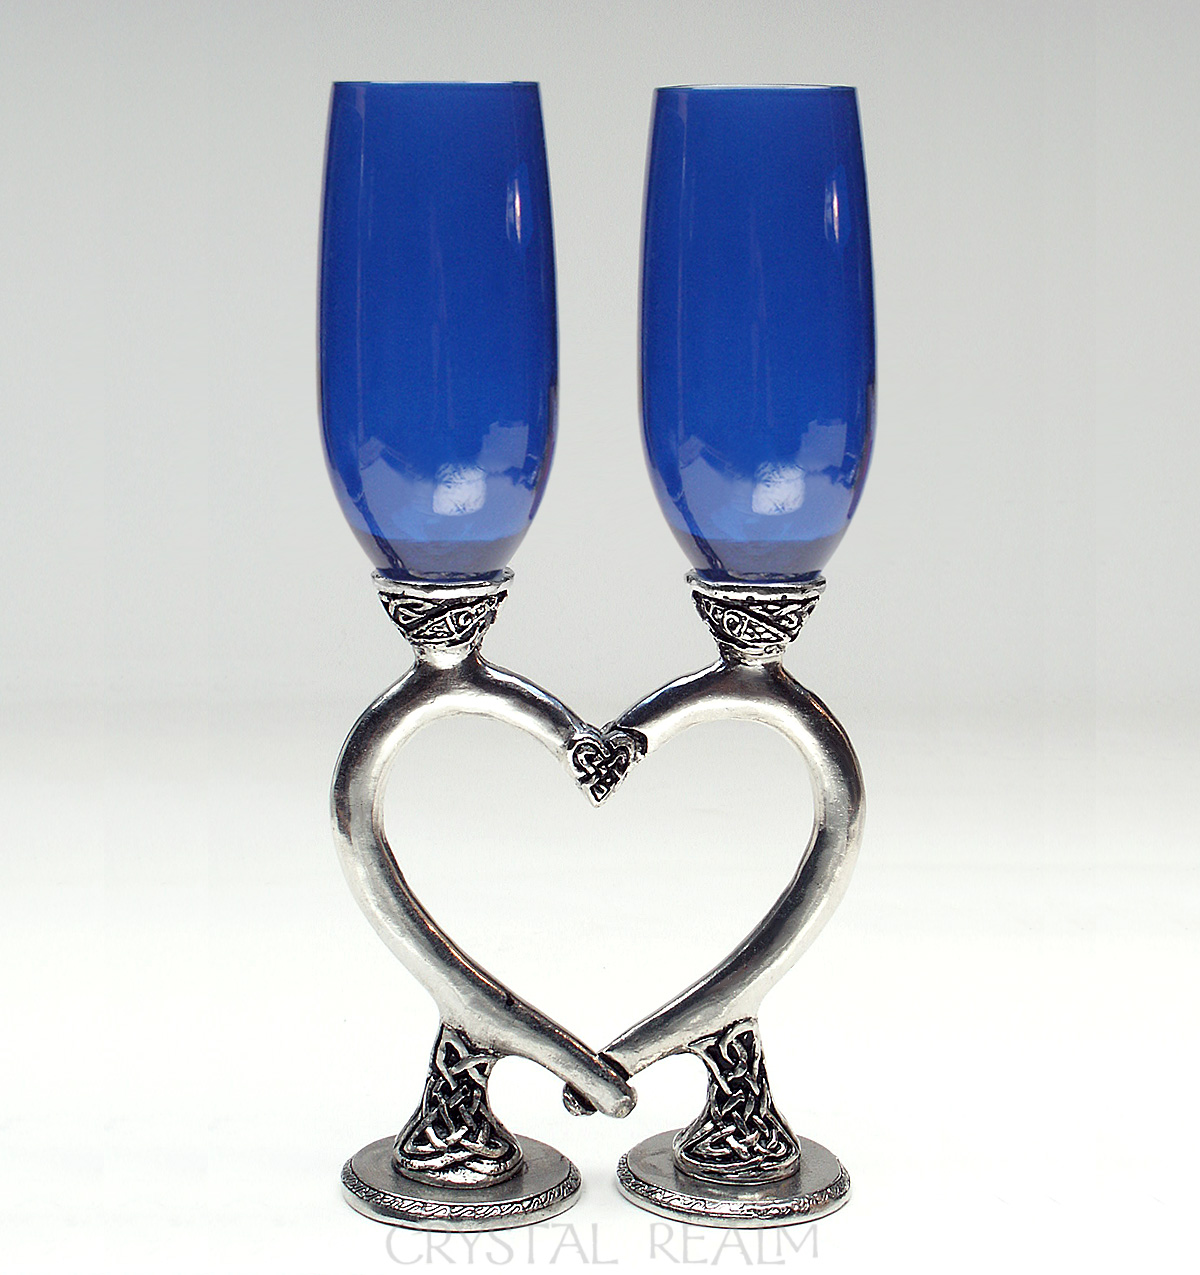 Royal blue champagne flutes with Celtic bases